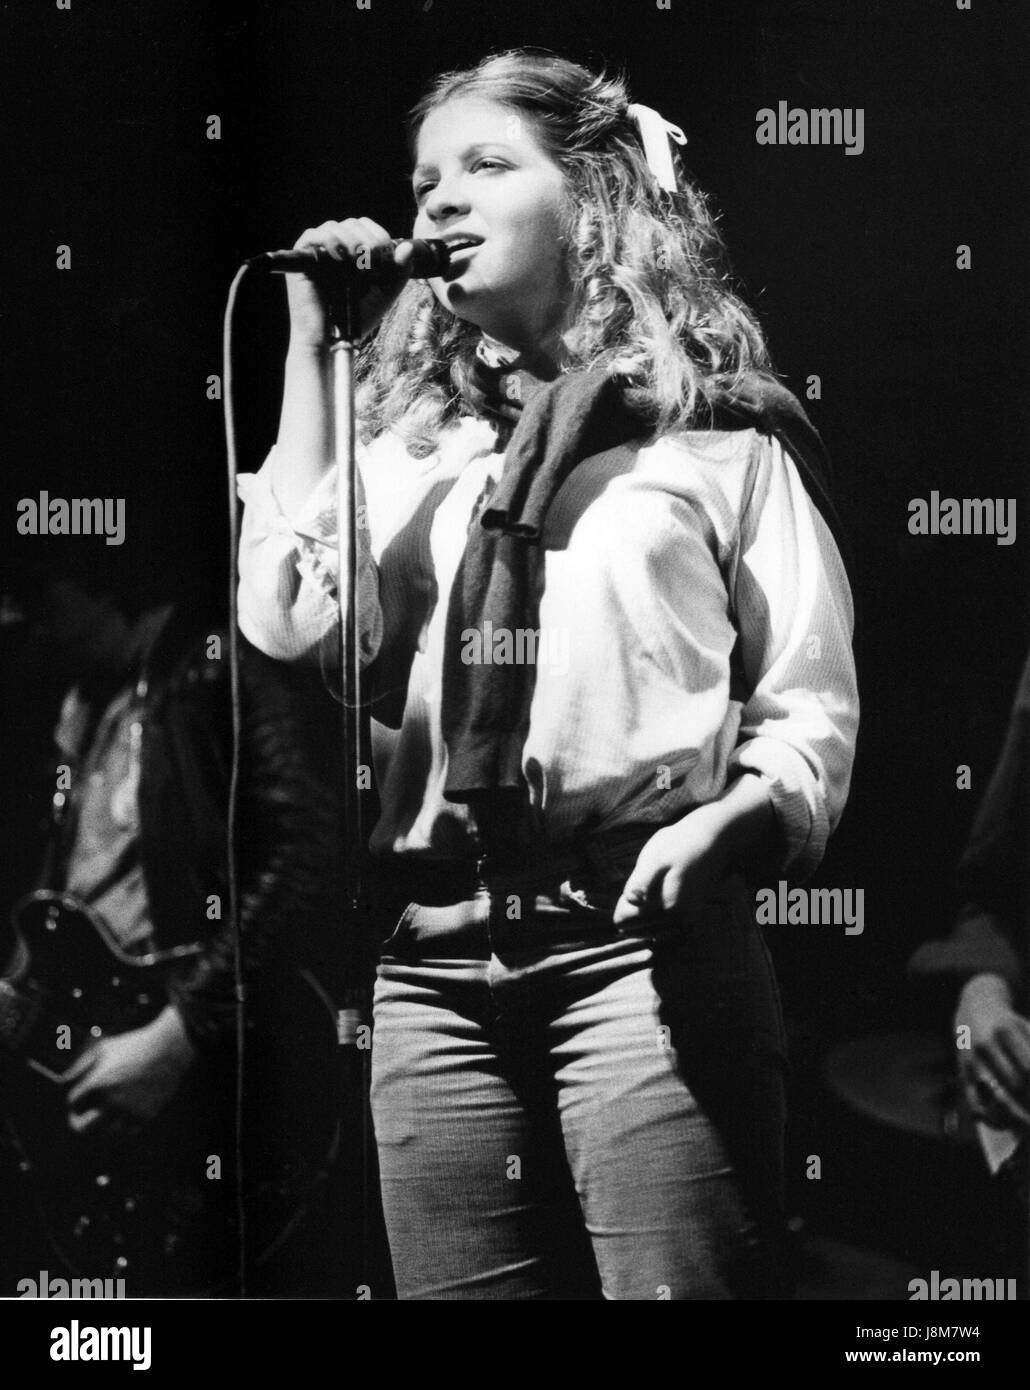 Rachel Sweet, U.S. pop singer, performs live on stage in London, England on November 19, 1978. She was signed to Independent record label Stiff Records. Stock Photo